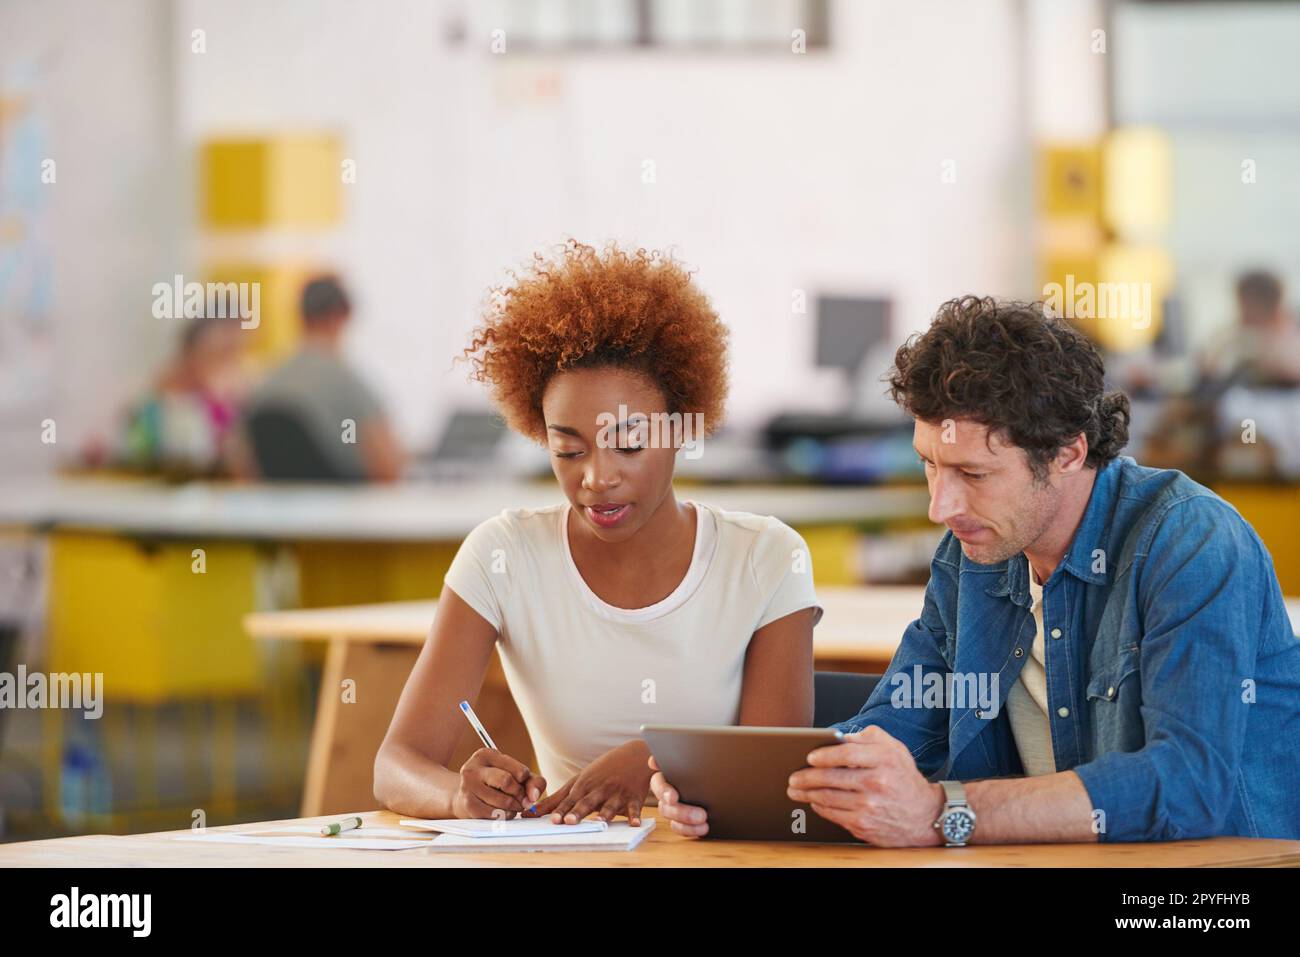 Collaborate connect and create. two coworkers using a digital tablet together in an office. Stock Photo